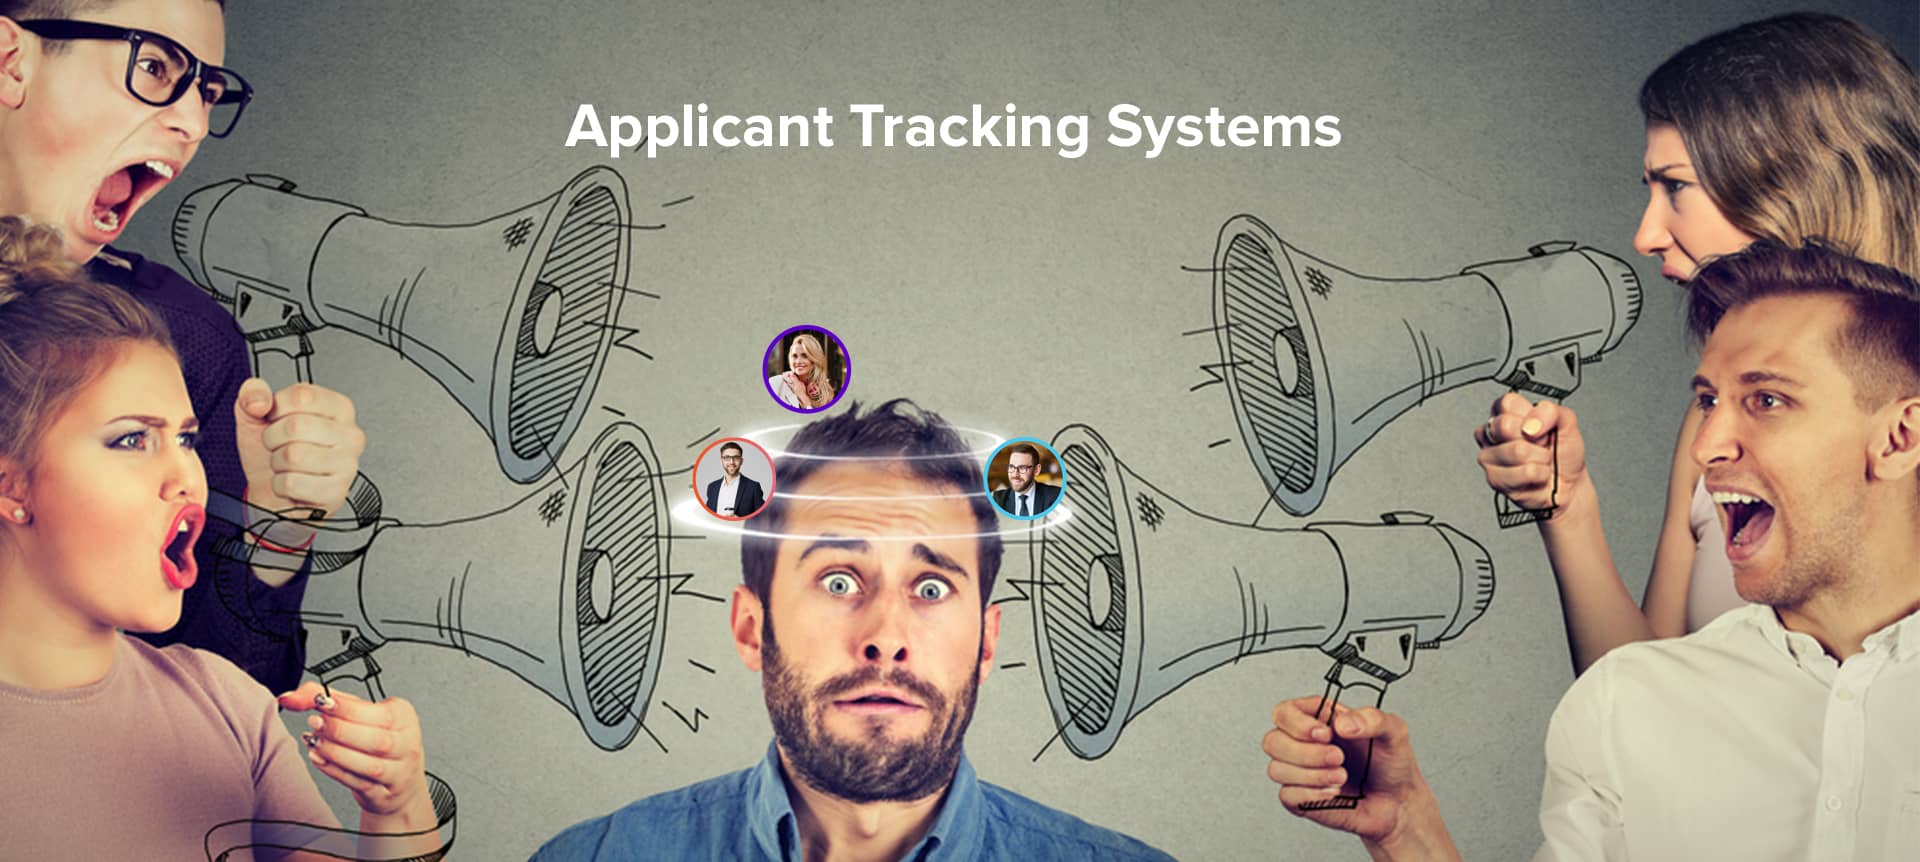 6 Important Things You Need to Know About Applicant Tracking Systems